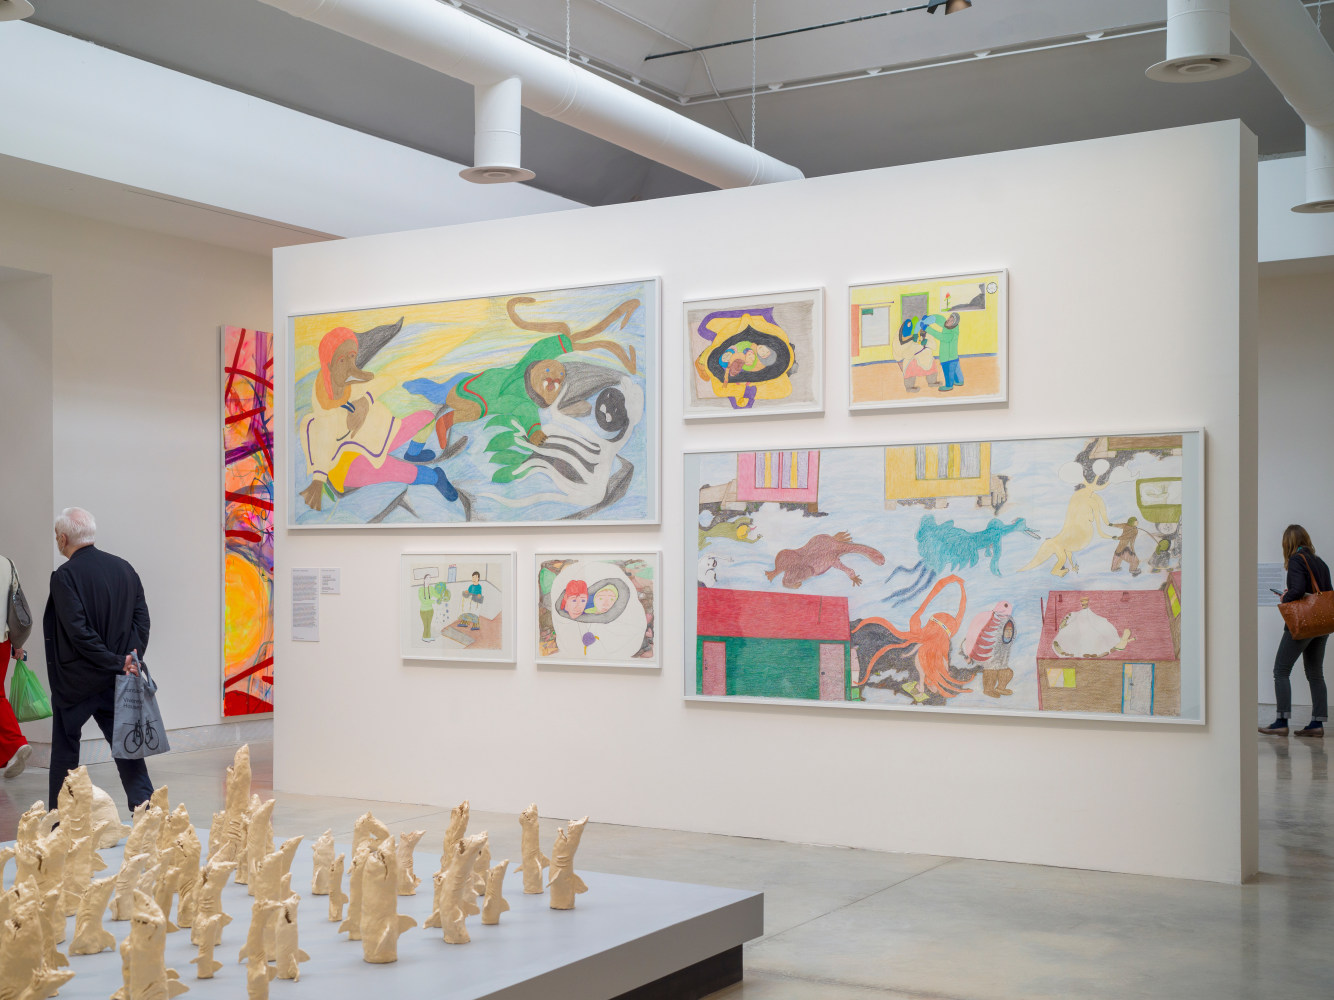 Installation view of artist Shuvinai Ashoona's drawings hung up on a white wall.